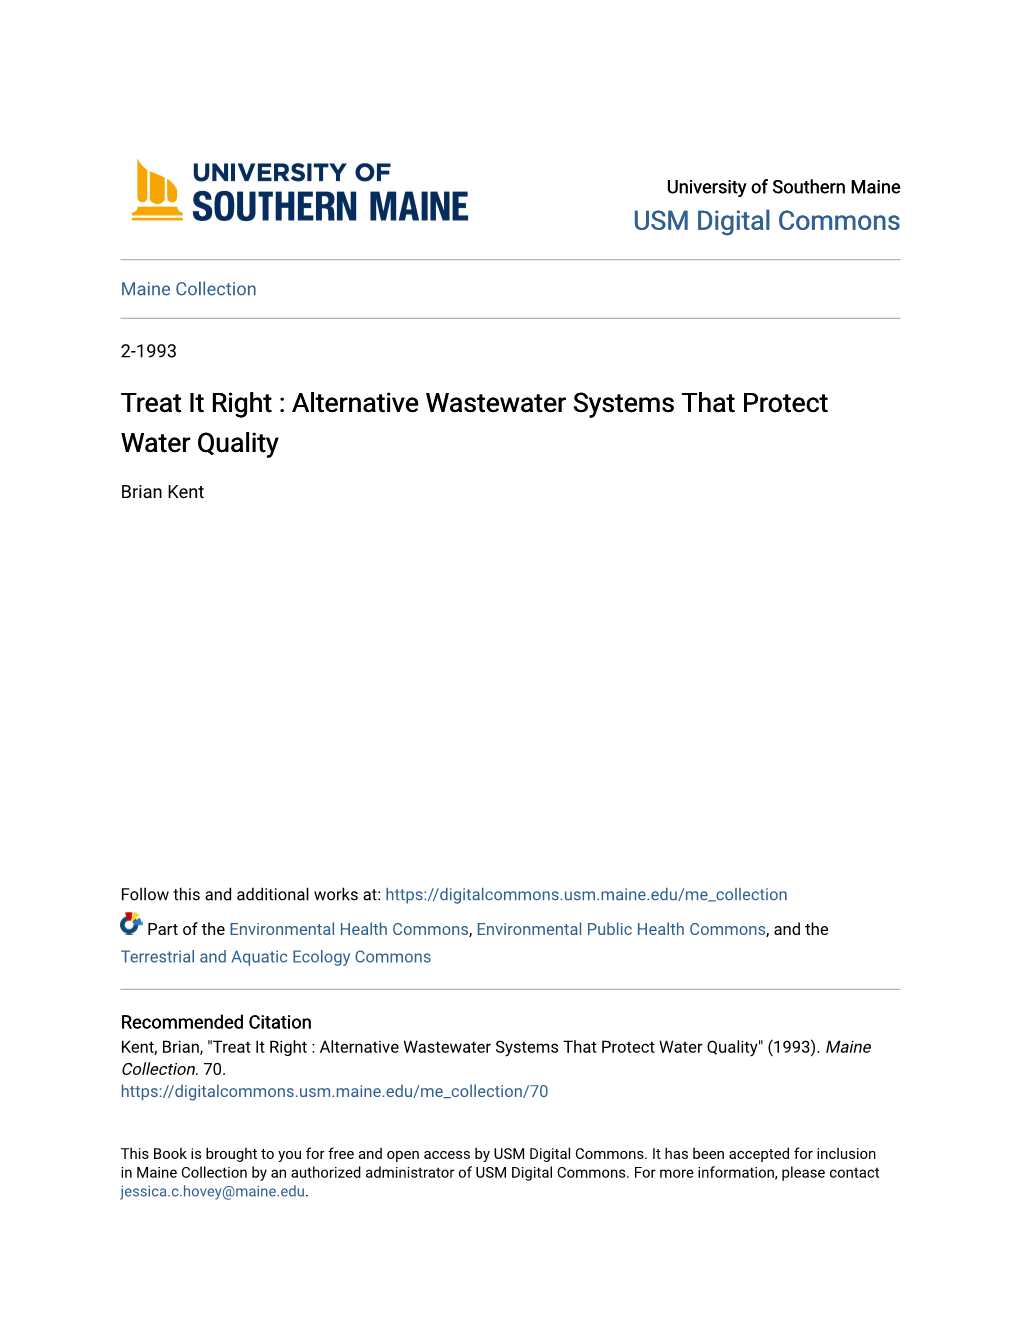 Treat It Right : Alternative Wastewater Systems That Protect Water Quality